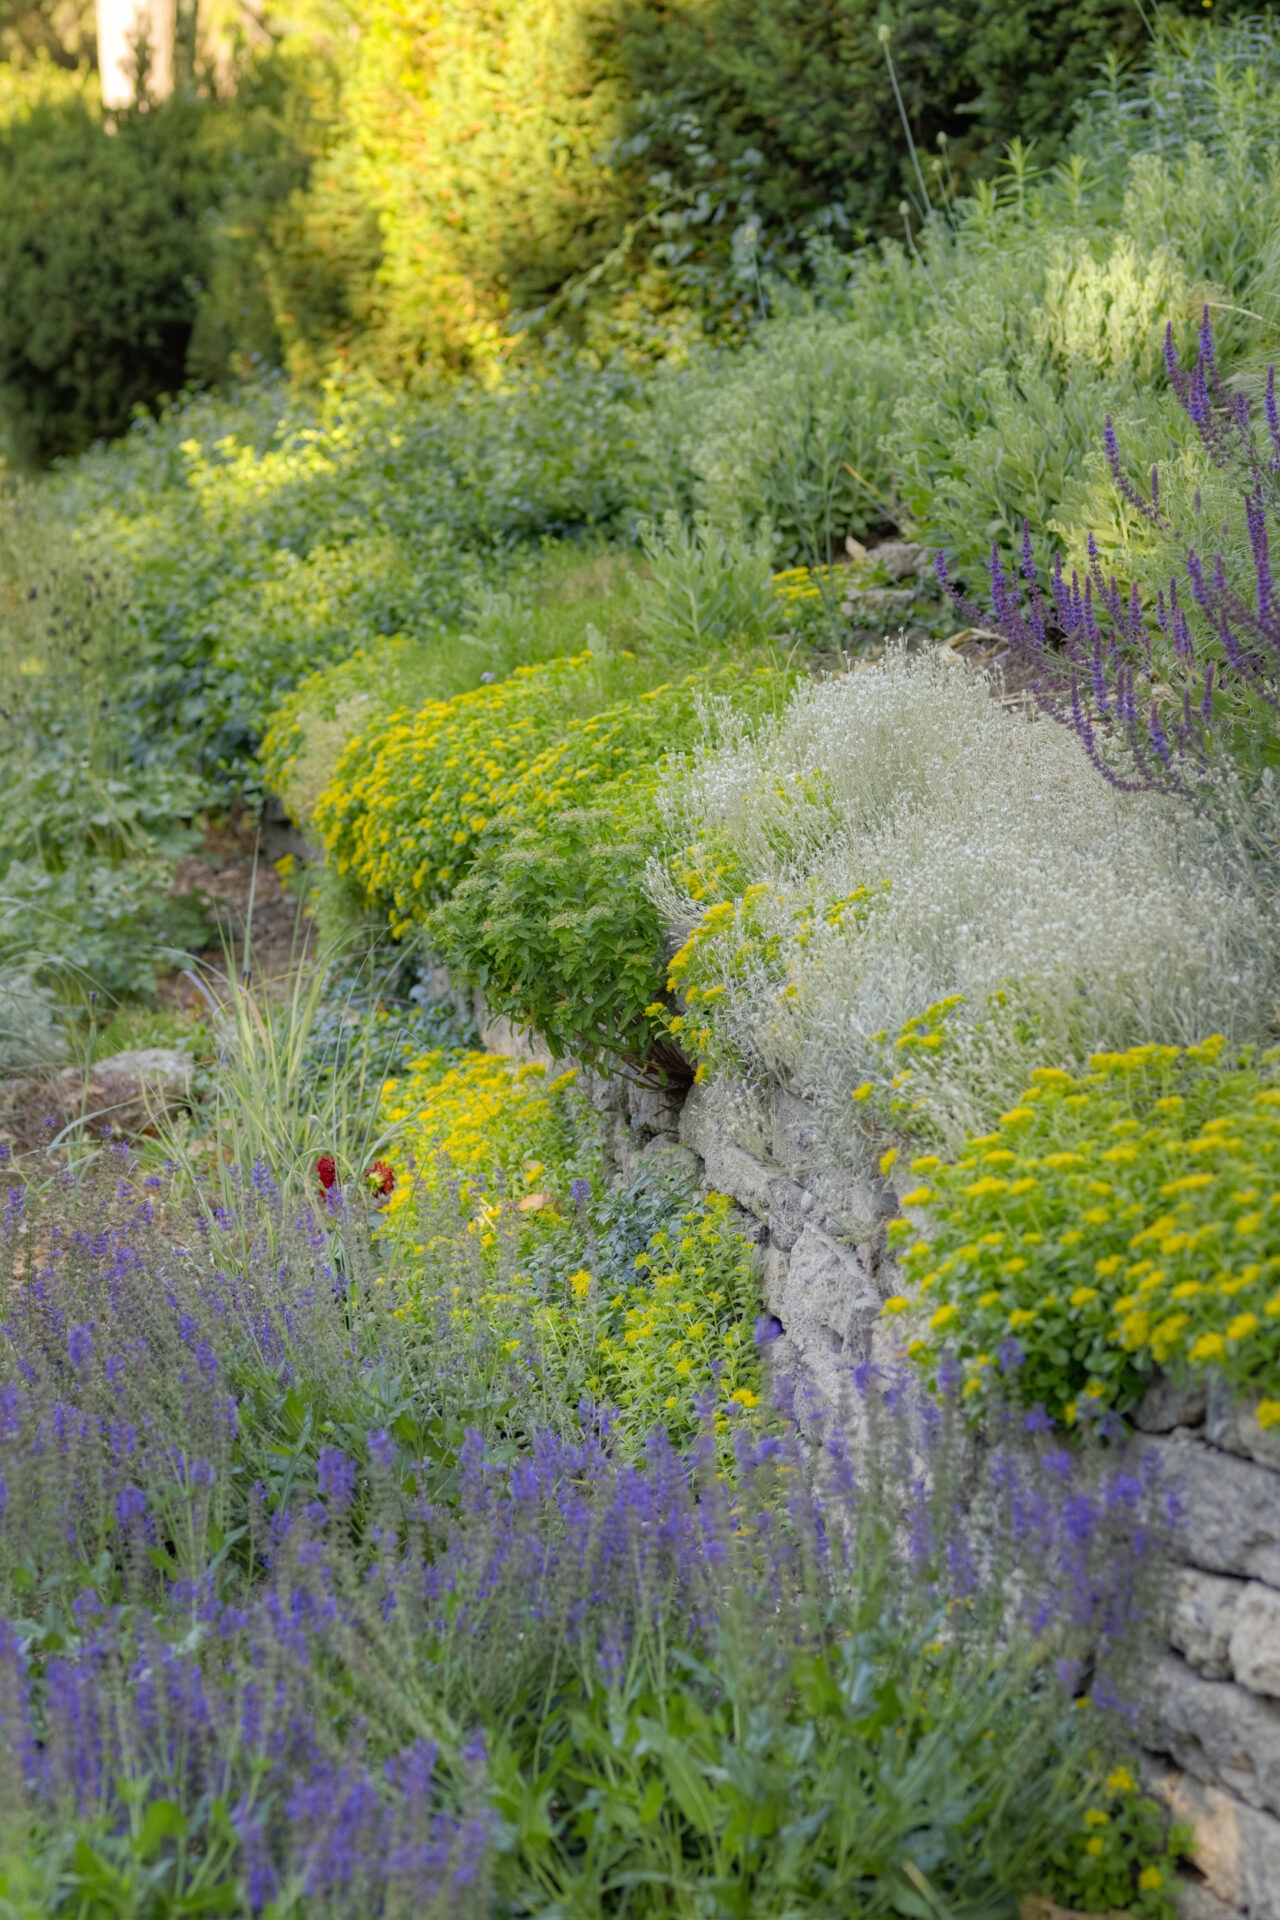 A lush garden with a variety of plants in bloom, featuring yellow and purple flowers with stone retaining walls amidst green foliage.